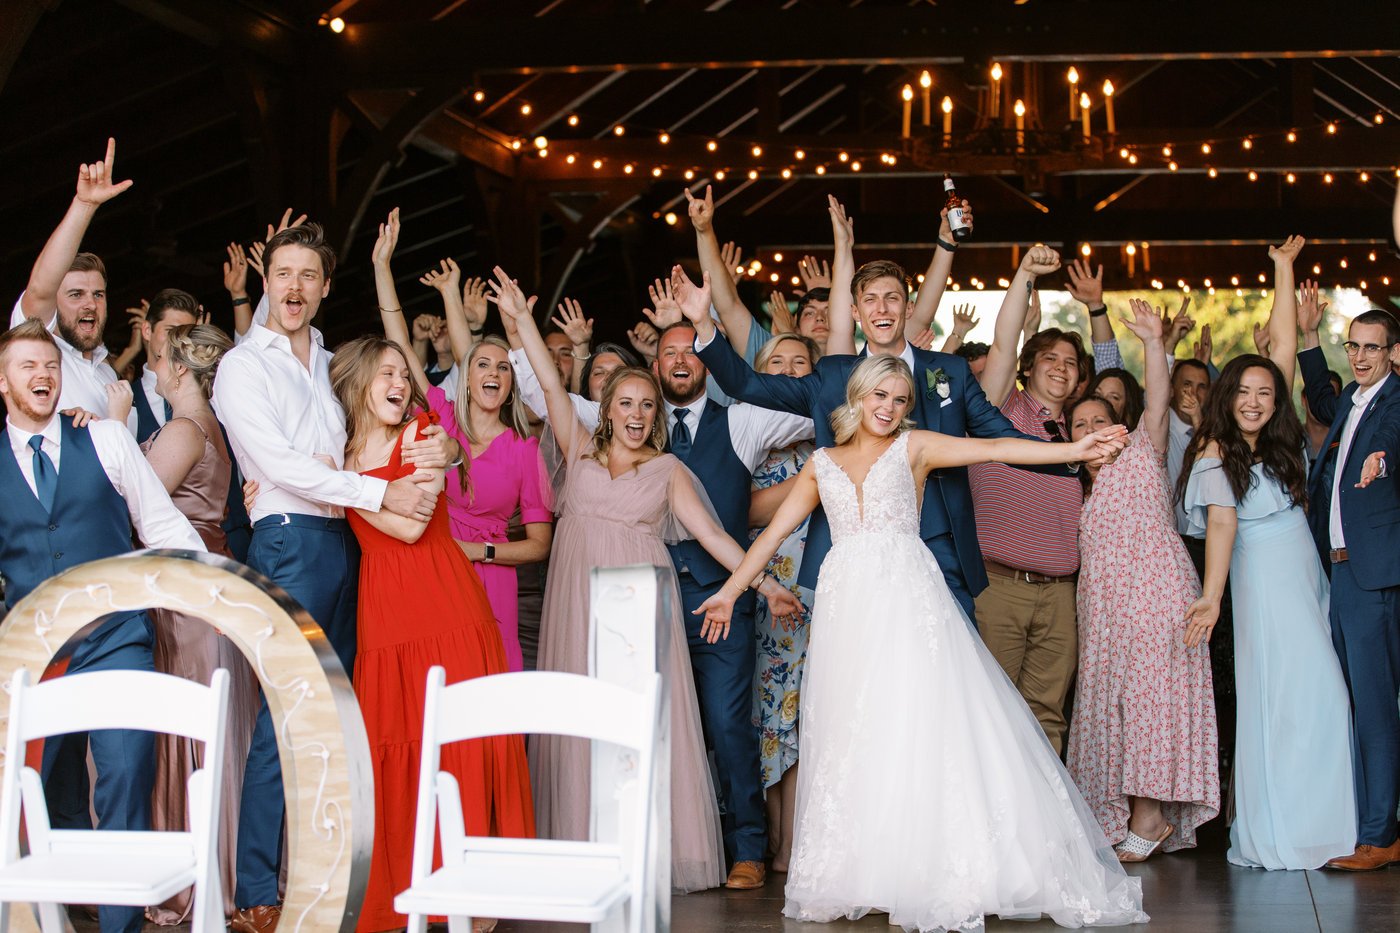 You'll definitely want this picture on your big day!❤ Have you told your photographer yet that you need this shot?🤩📸

www.greengablesfarms.com

📸 Naisang Photography
Chantelle Jordan Photography

#weddingreception #WeddingVenue #StatesvilleNC #gre